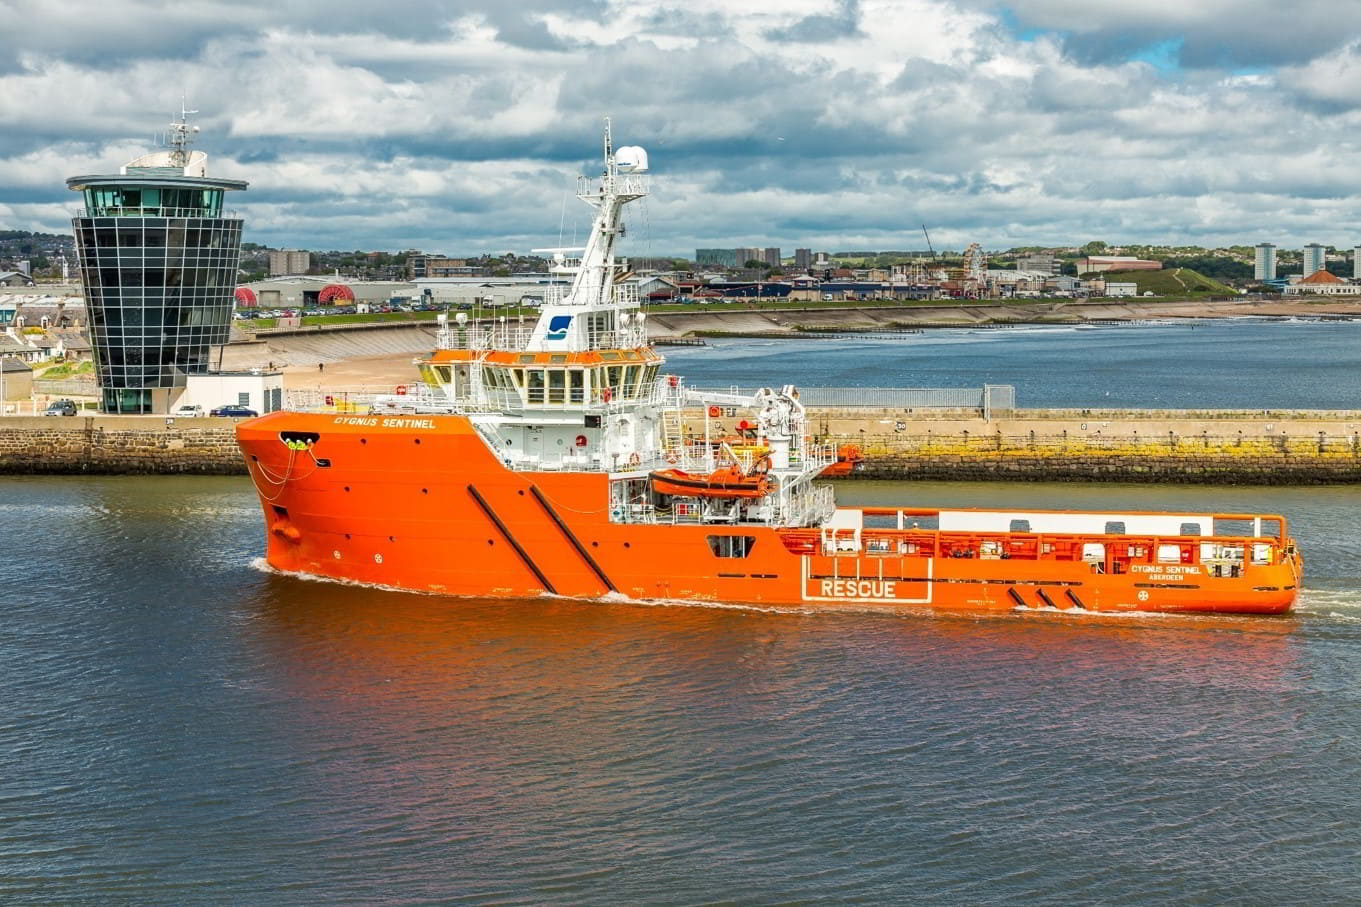 Sentinel Marine bags about $12.2 million for North Sea gig with Neptune Energy